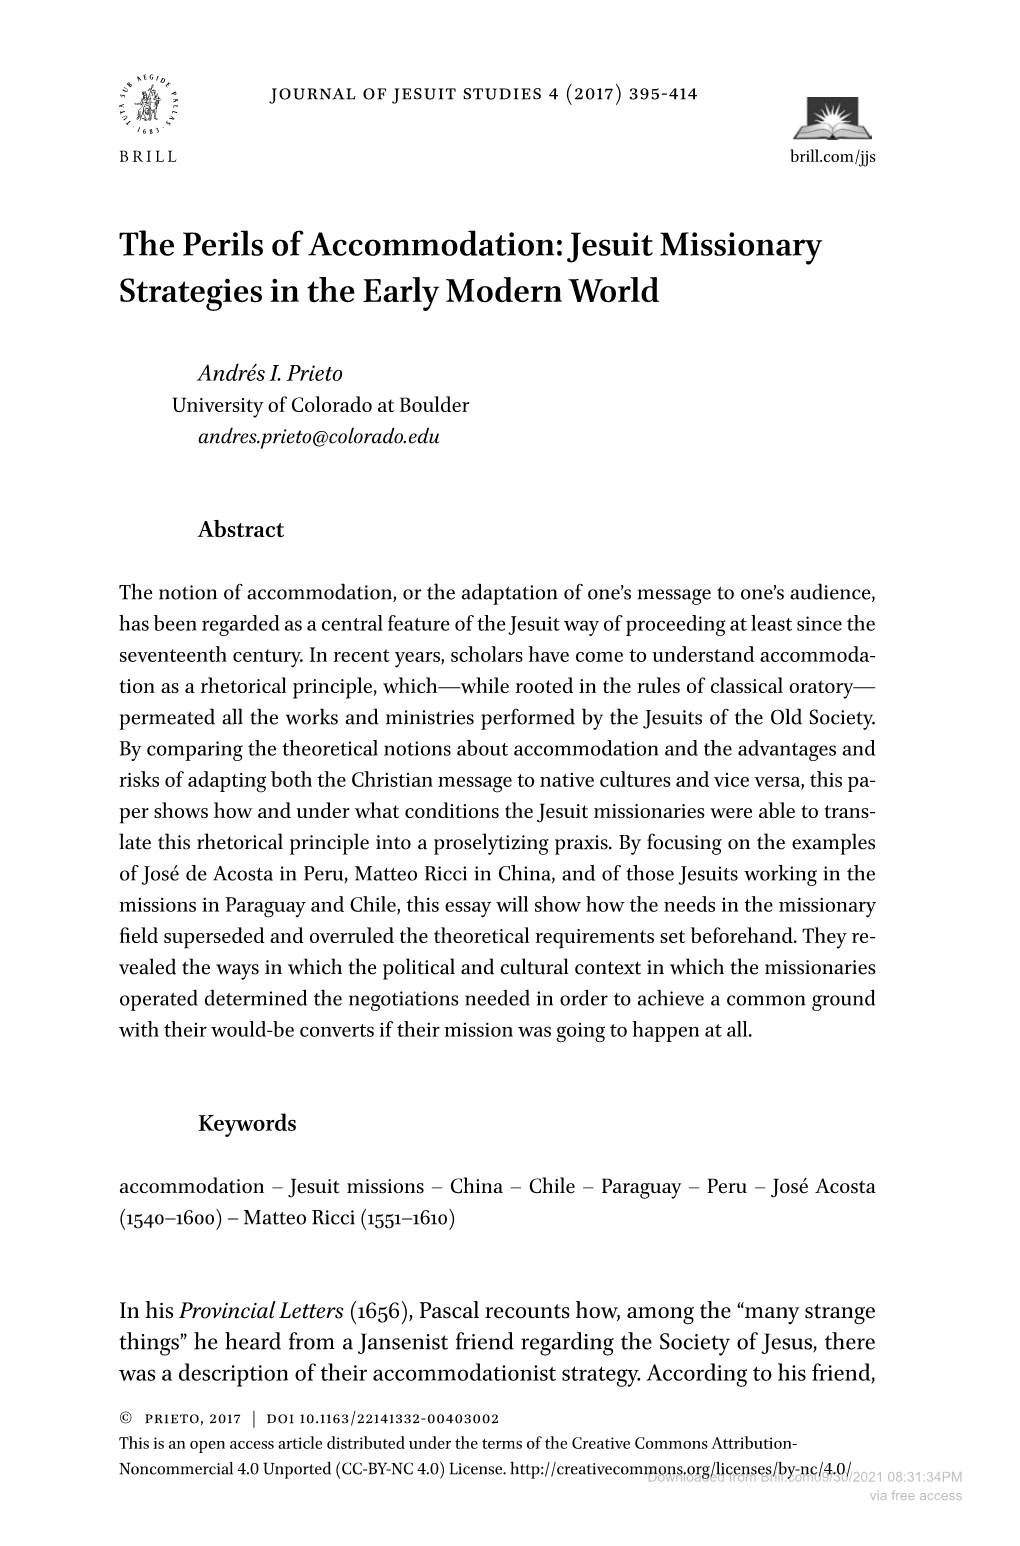 The Perils of Accommodation: Jesuit Missionary Strategies in the Early Modern World